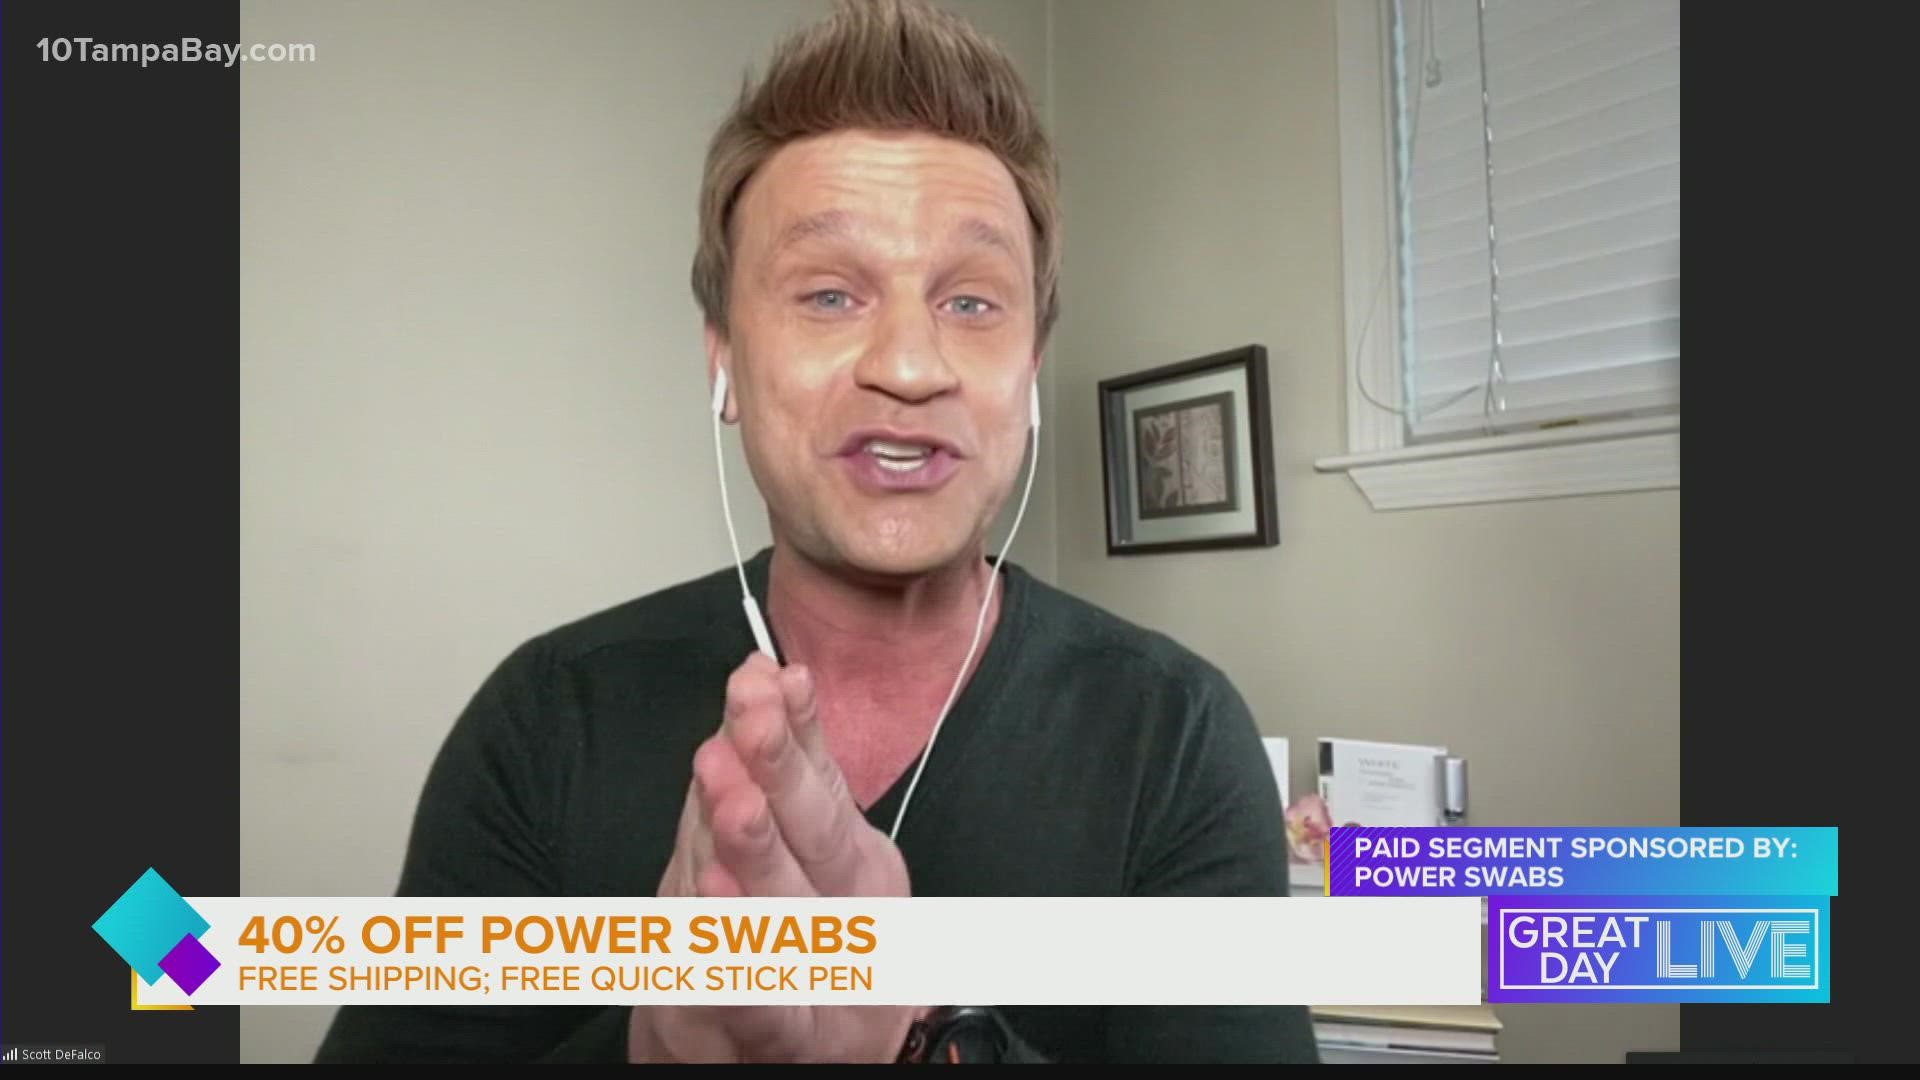 Paid segment sponsored by Power Swabs